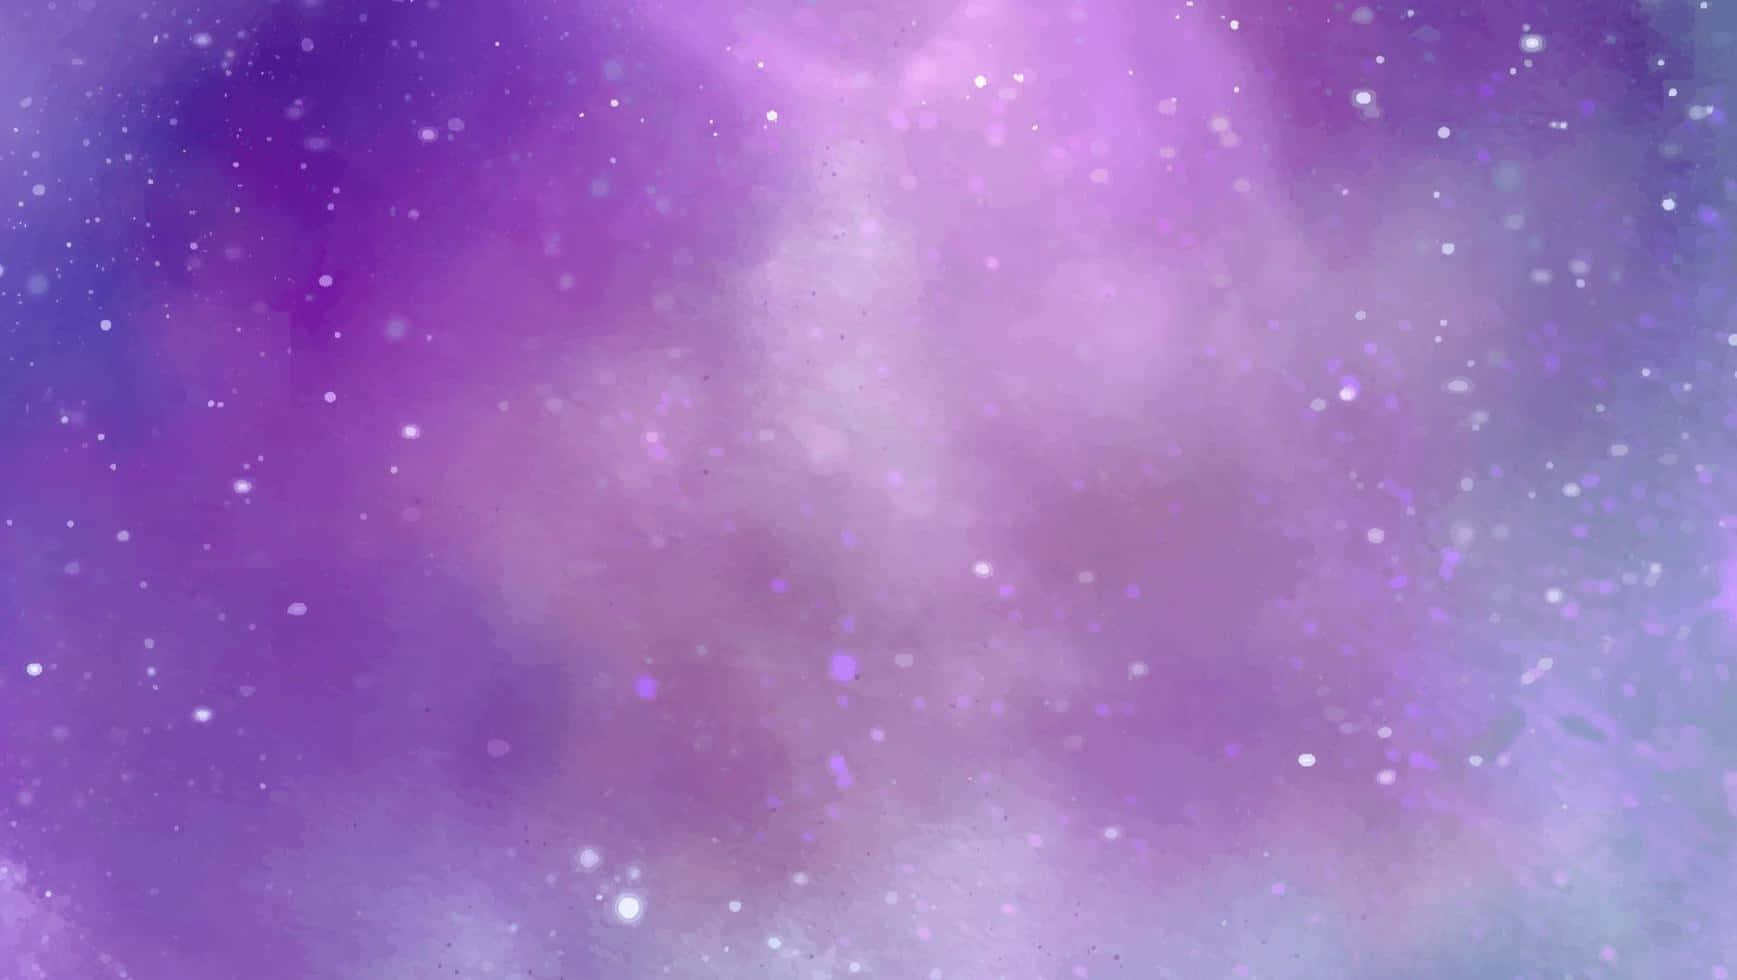 Take a Journey Through the Magical Pastel Galaxy